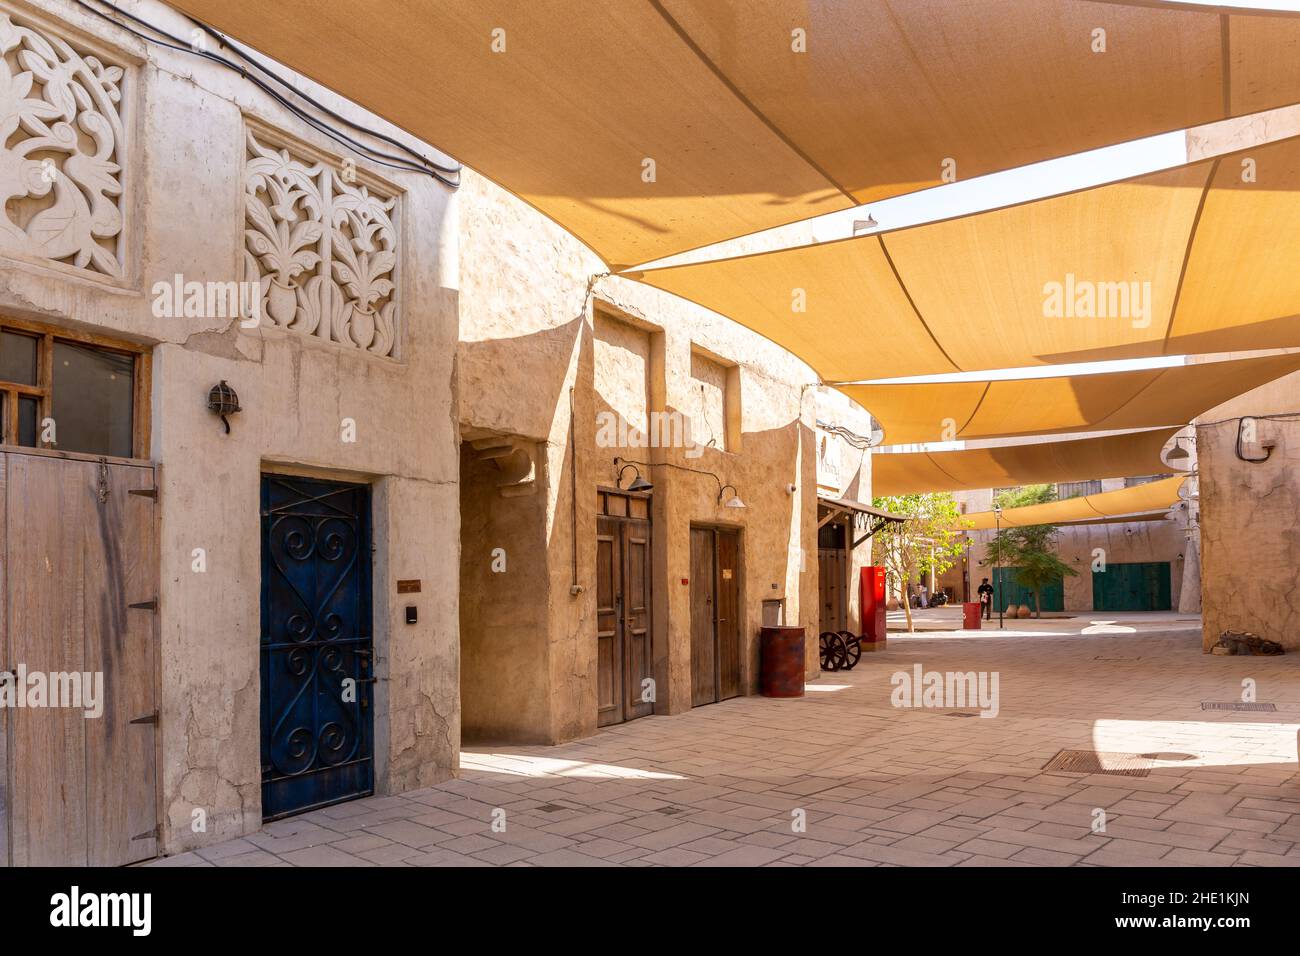 Al Fahidi Historical District stone street with traditional arabic style buildings with ornaments and sunshades above, Deira, Dubai, UAE. Stock Photo